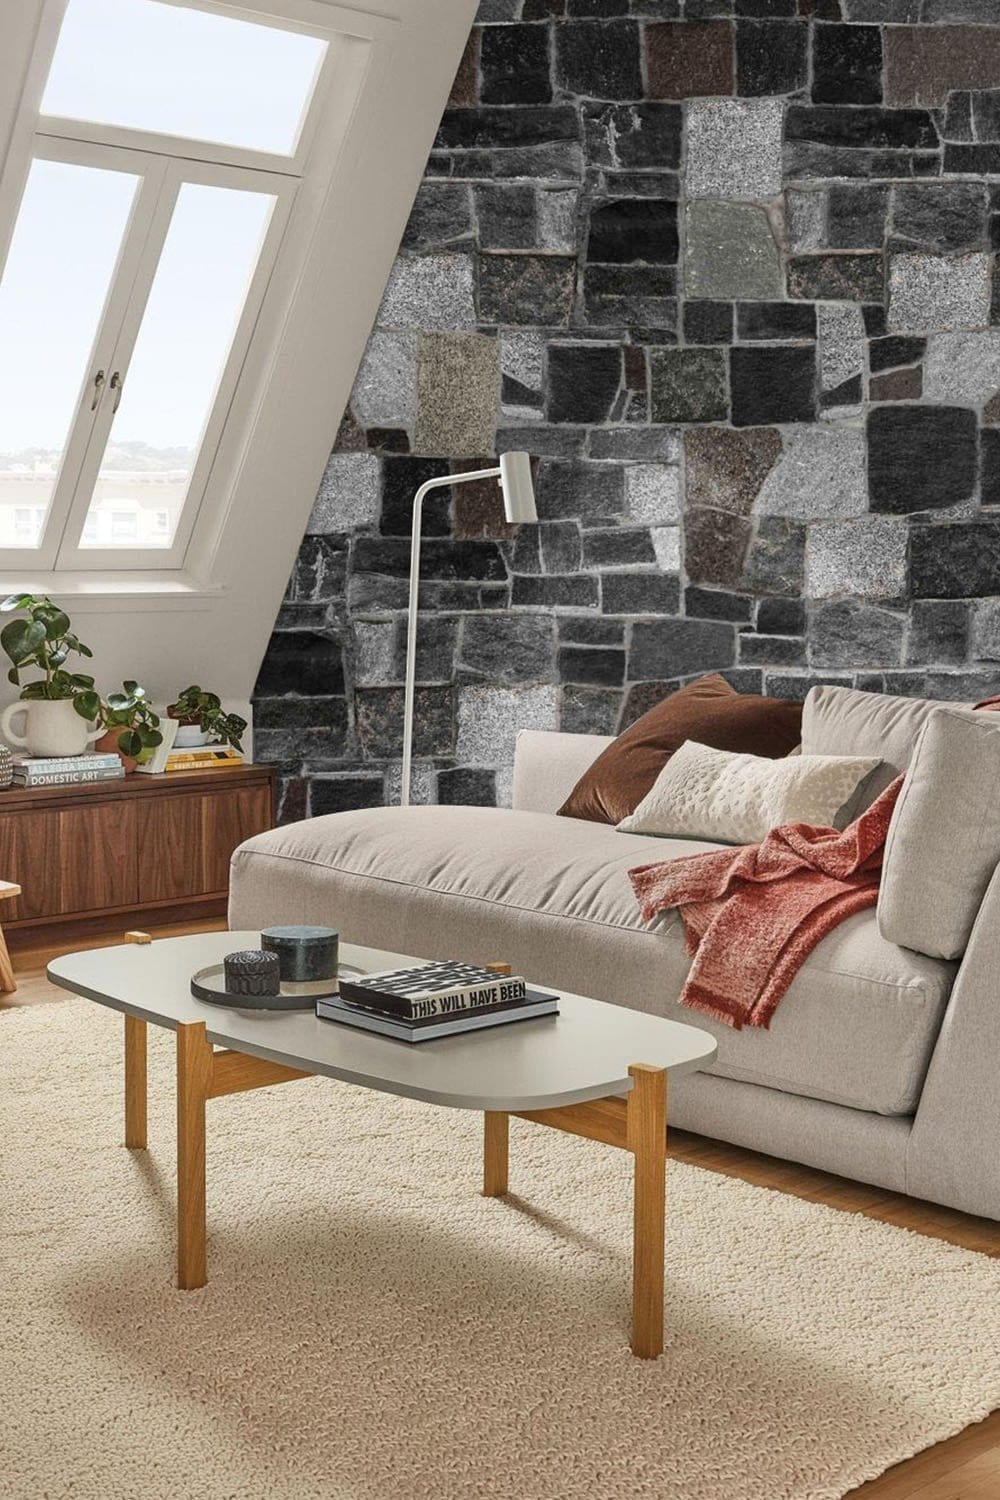 Splicing Brick Wallpaper Mural as a Decoration for the Home